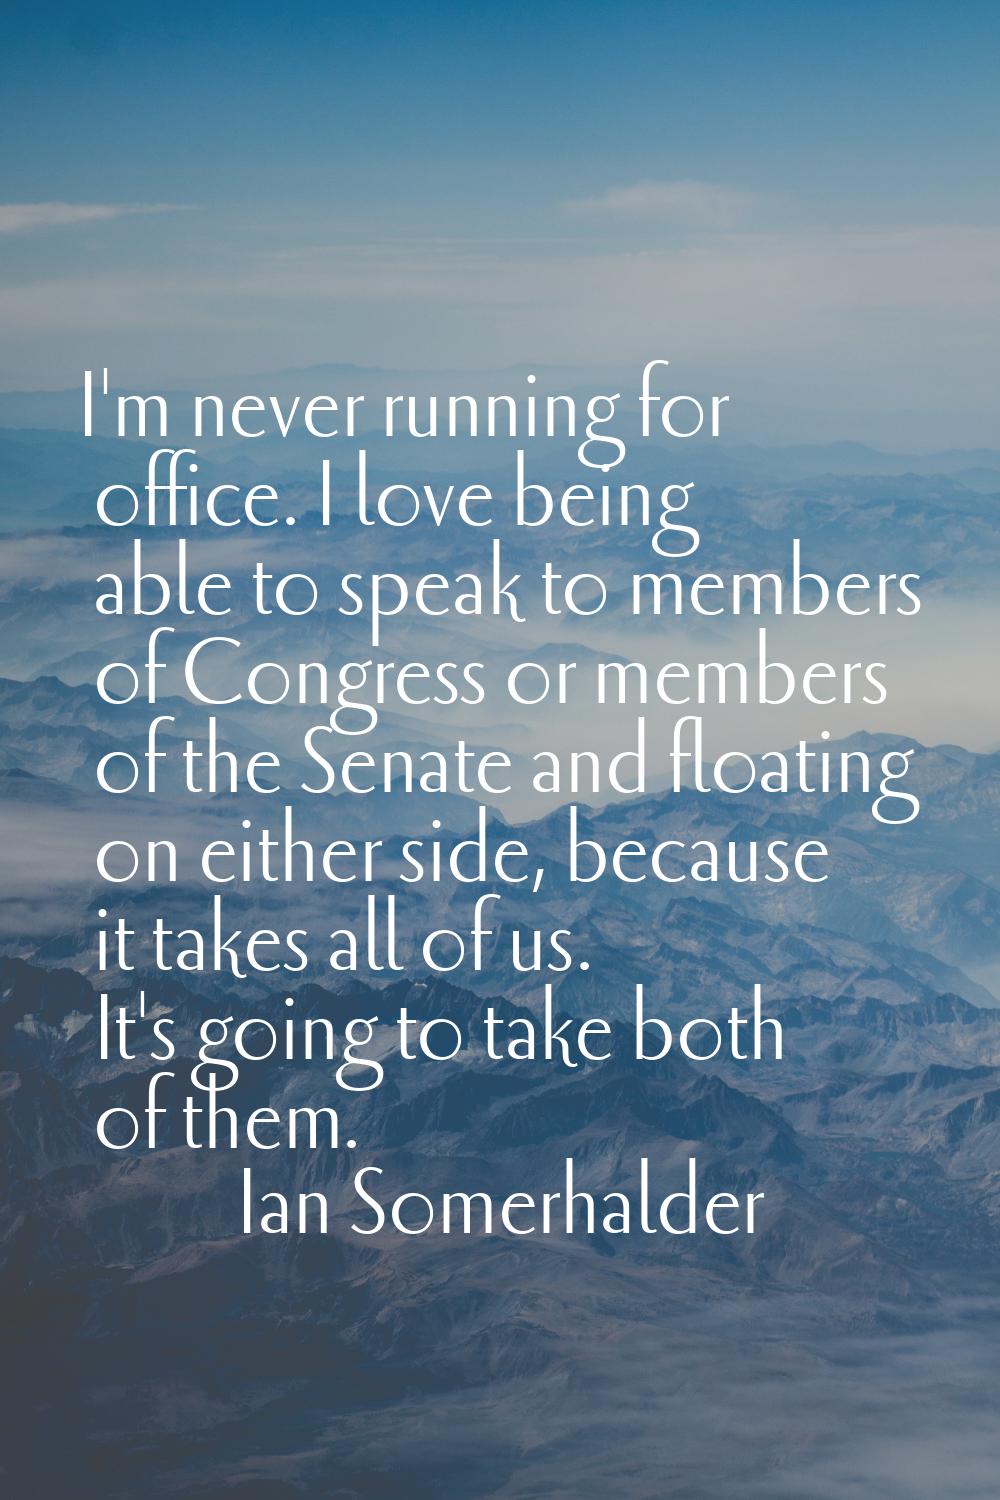 I'm never running for office. I love being able to speak to members of Congress or members of the S